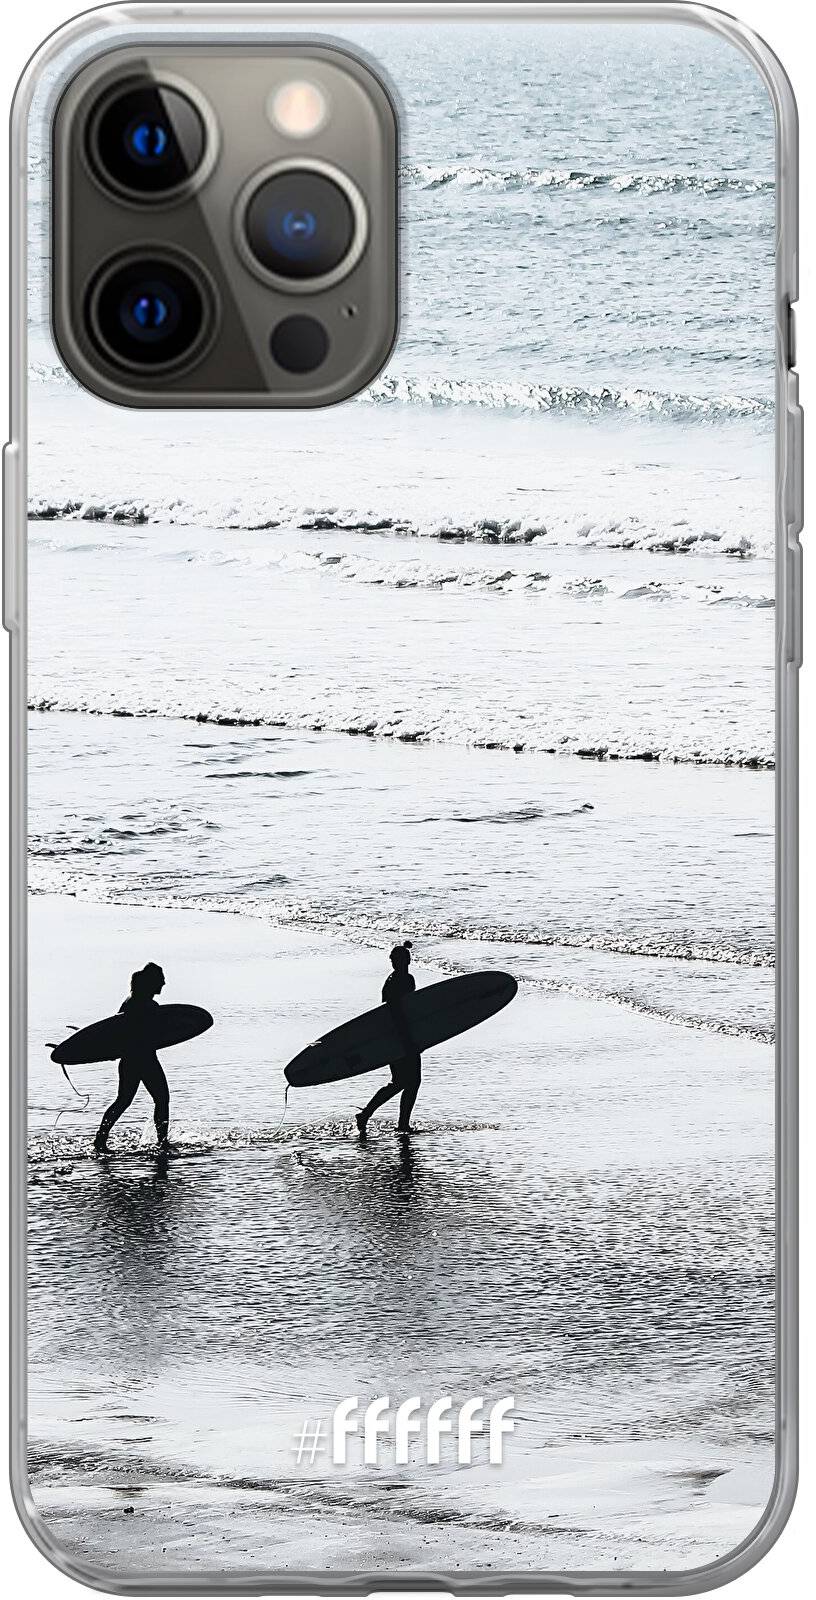 Surfing iPhone 12 Pro Max